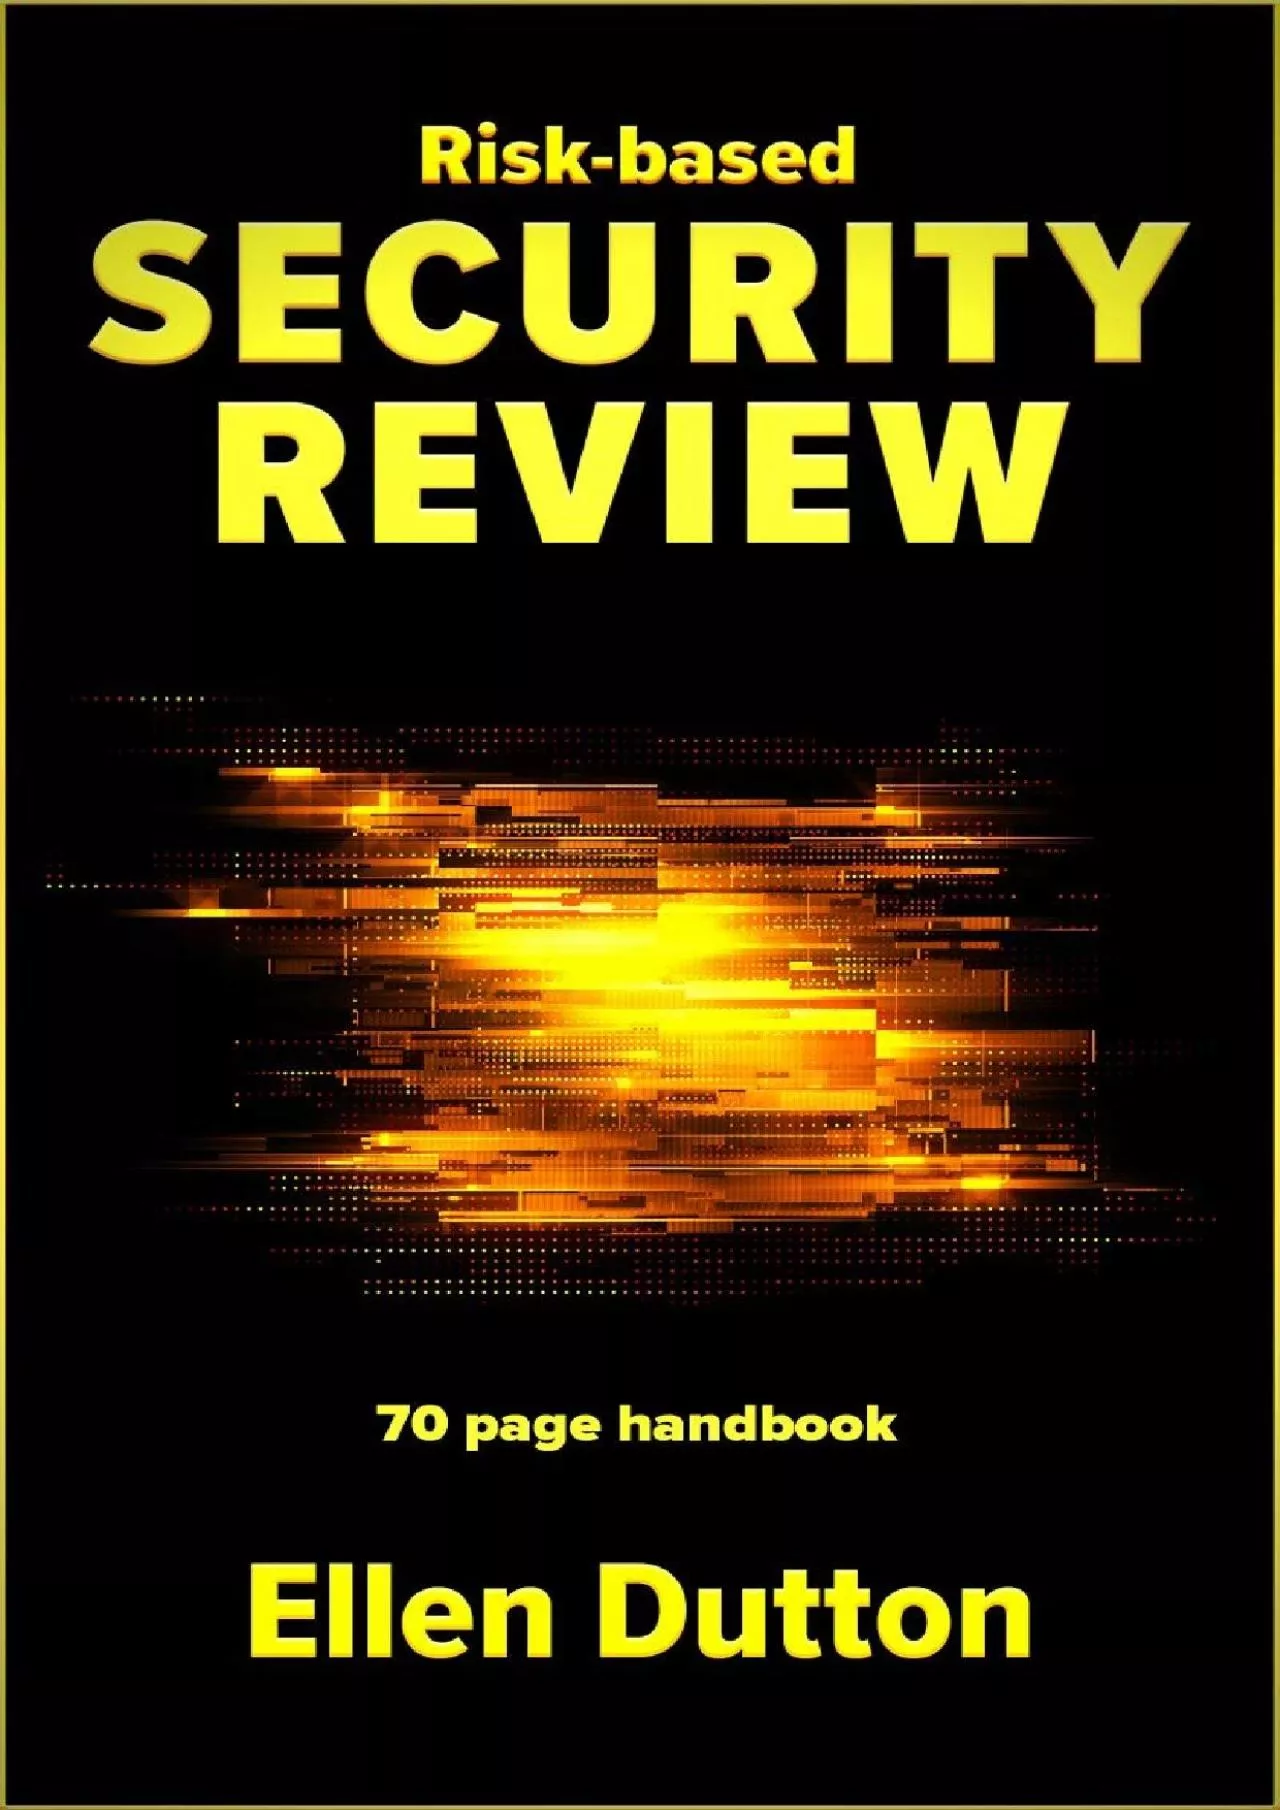 [BEST]-Risk-based Security Review: how-to handbook in 70 pages